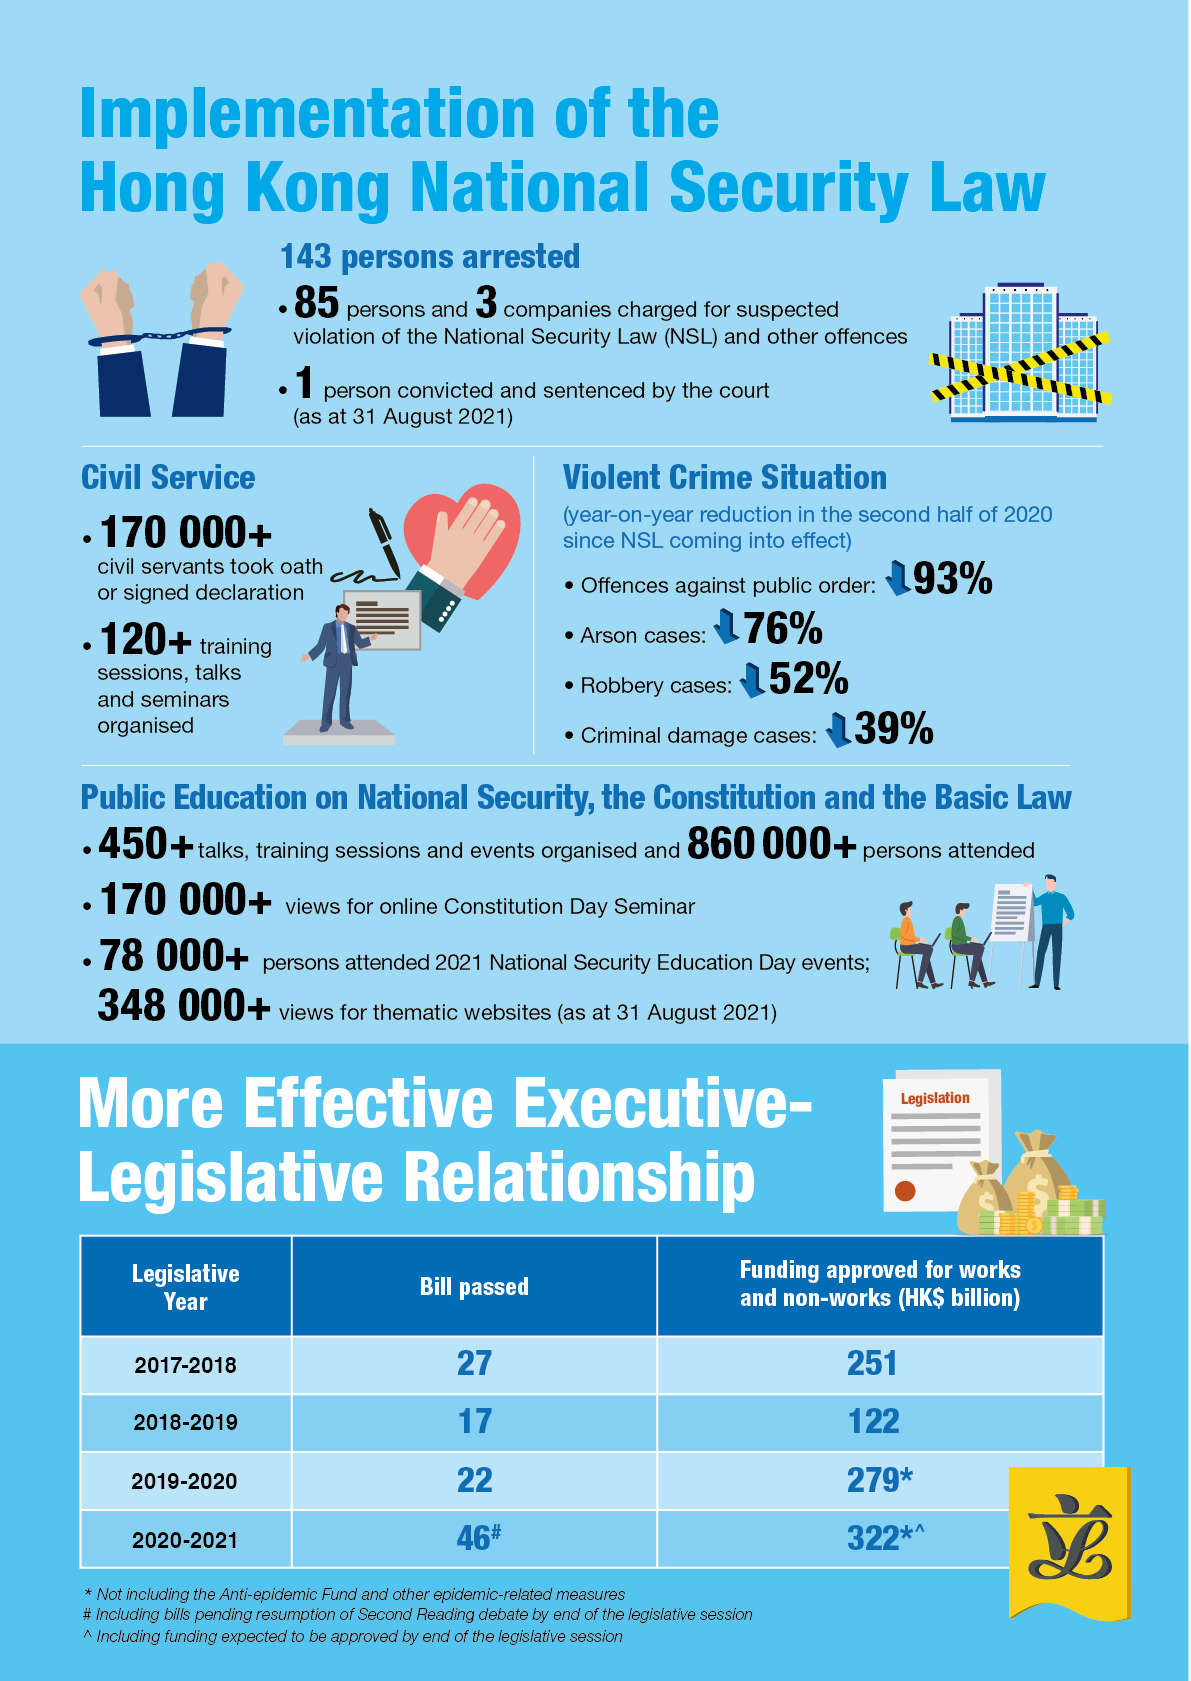 Implementation of the Hong Kong National Security Law and More Effective Executive-Legislative Relationship